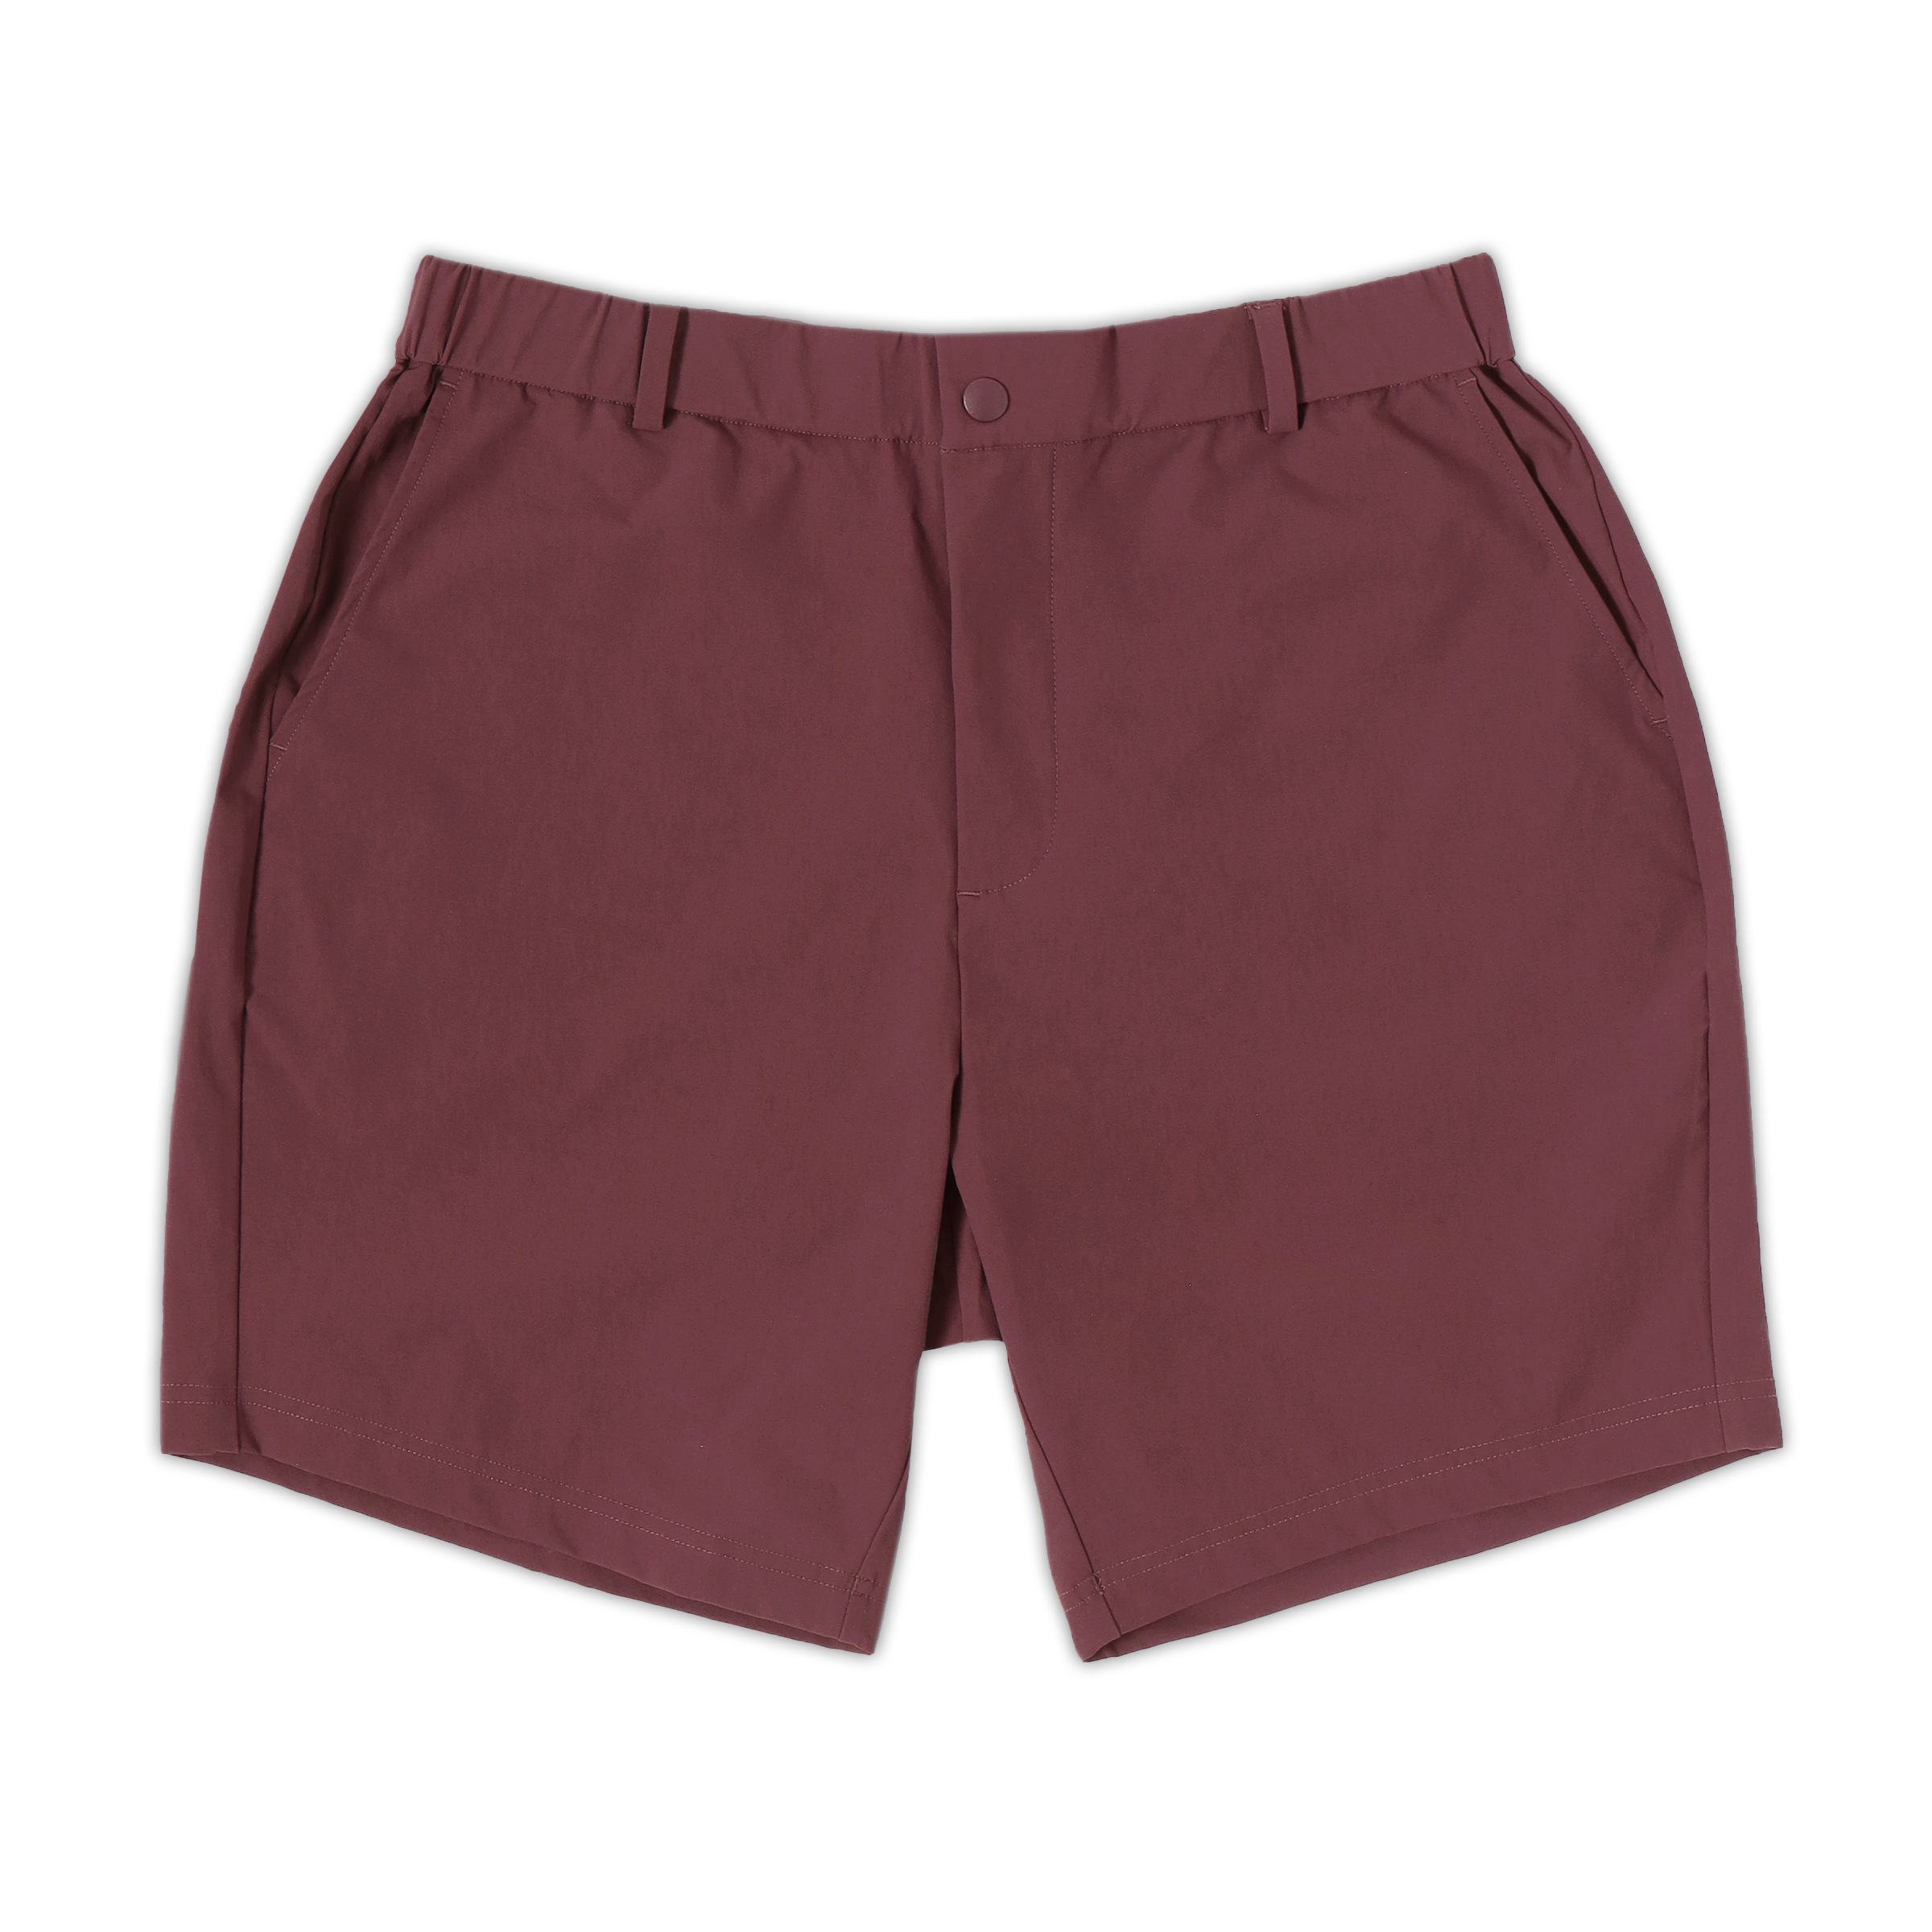 Tour Short 7" Wine with flat elastic waistband, belt loops, snap-button, zipper fly, and two front seam pockets